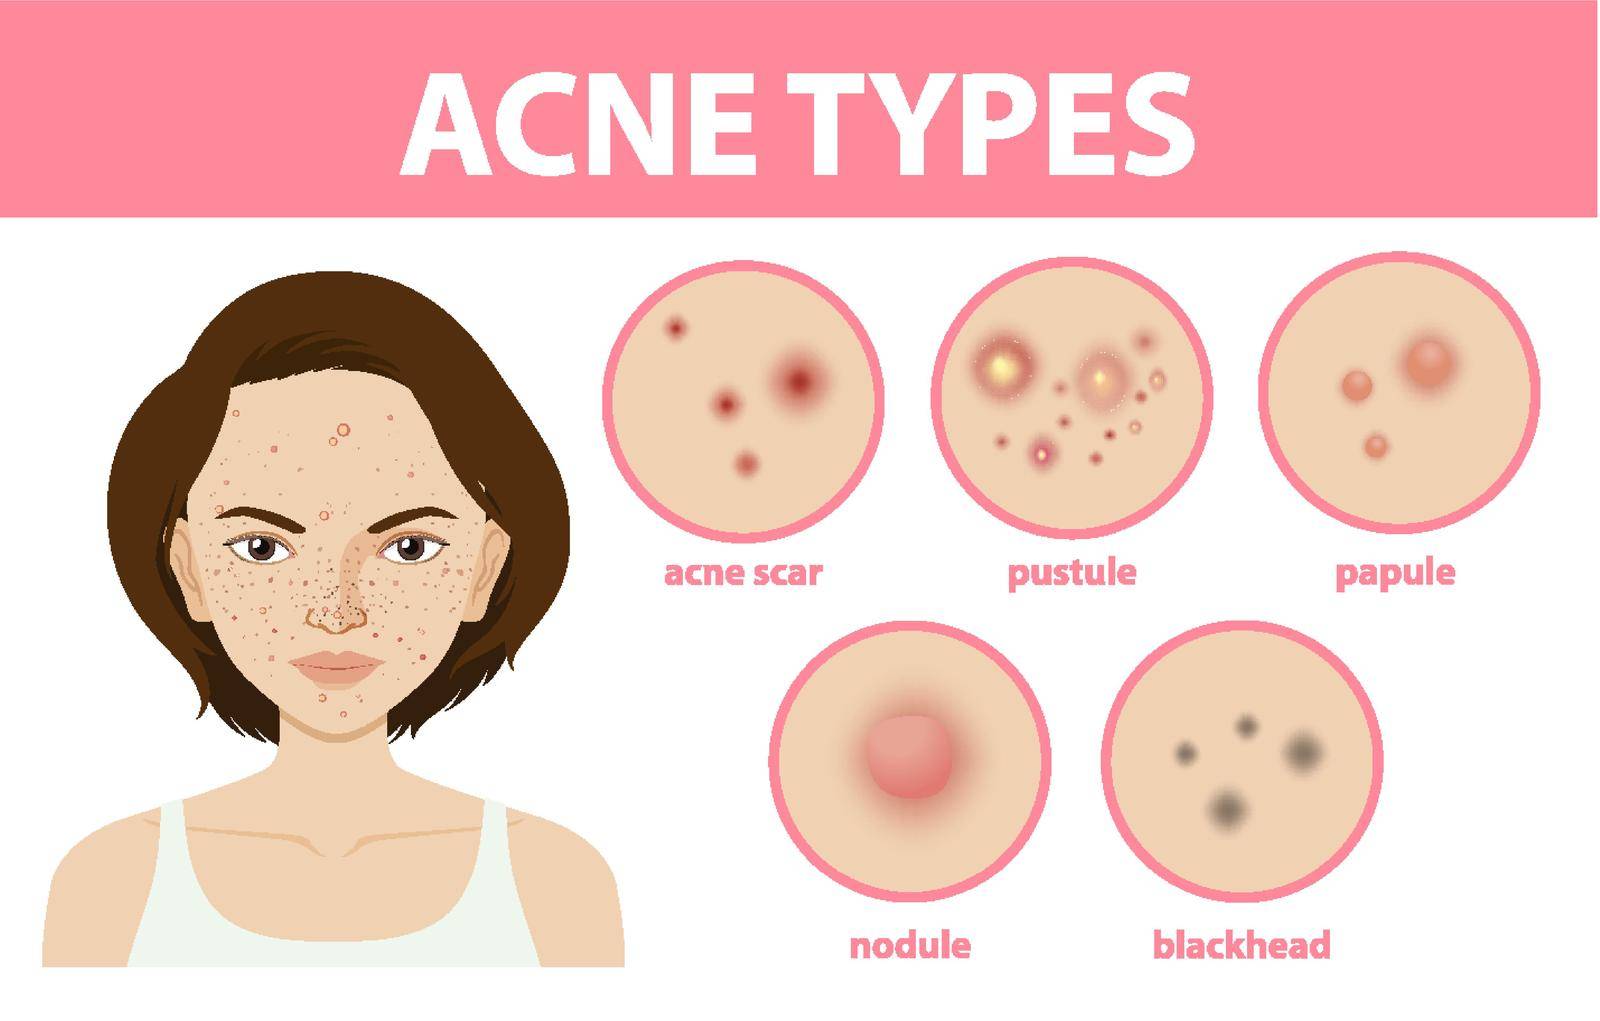 Types of acne on the skin or pimples by iimages